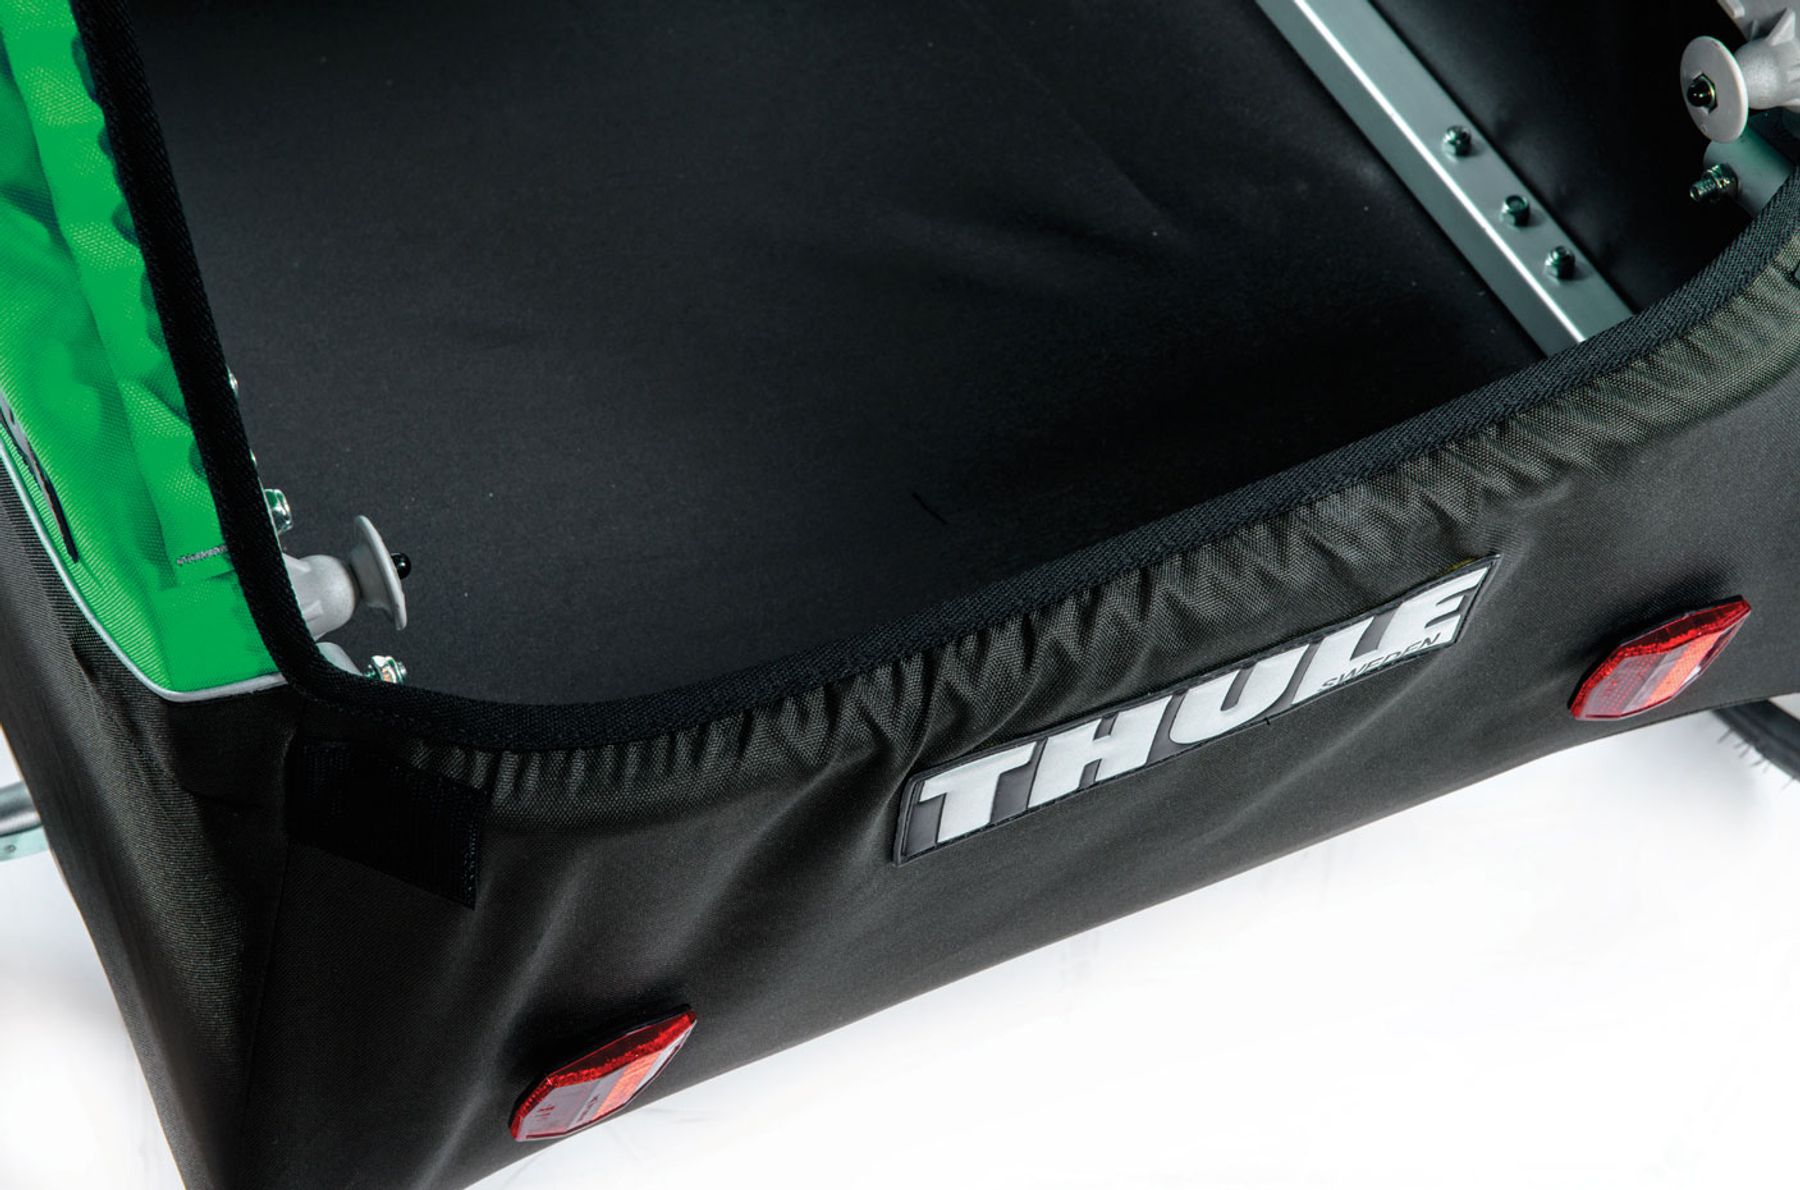 Bicycle trailer Thule Cadence detail